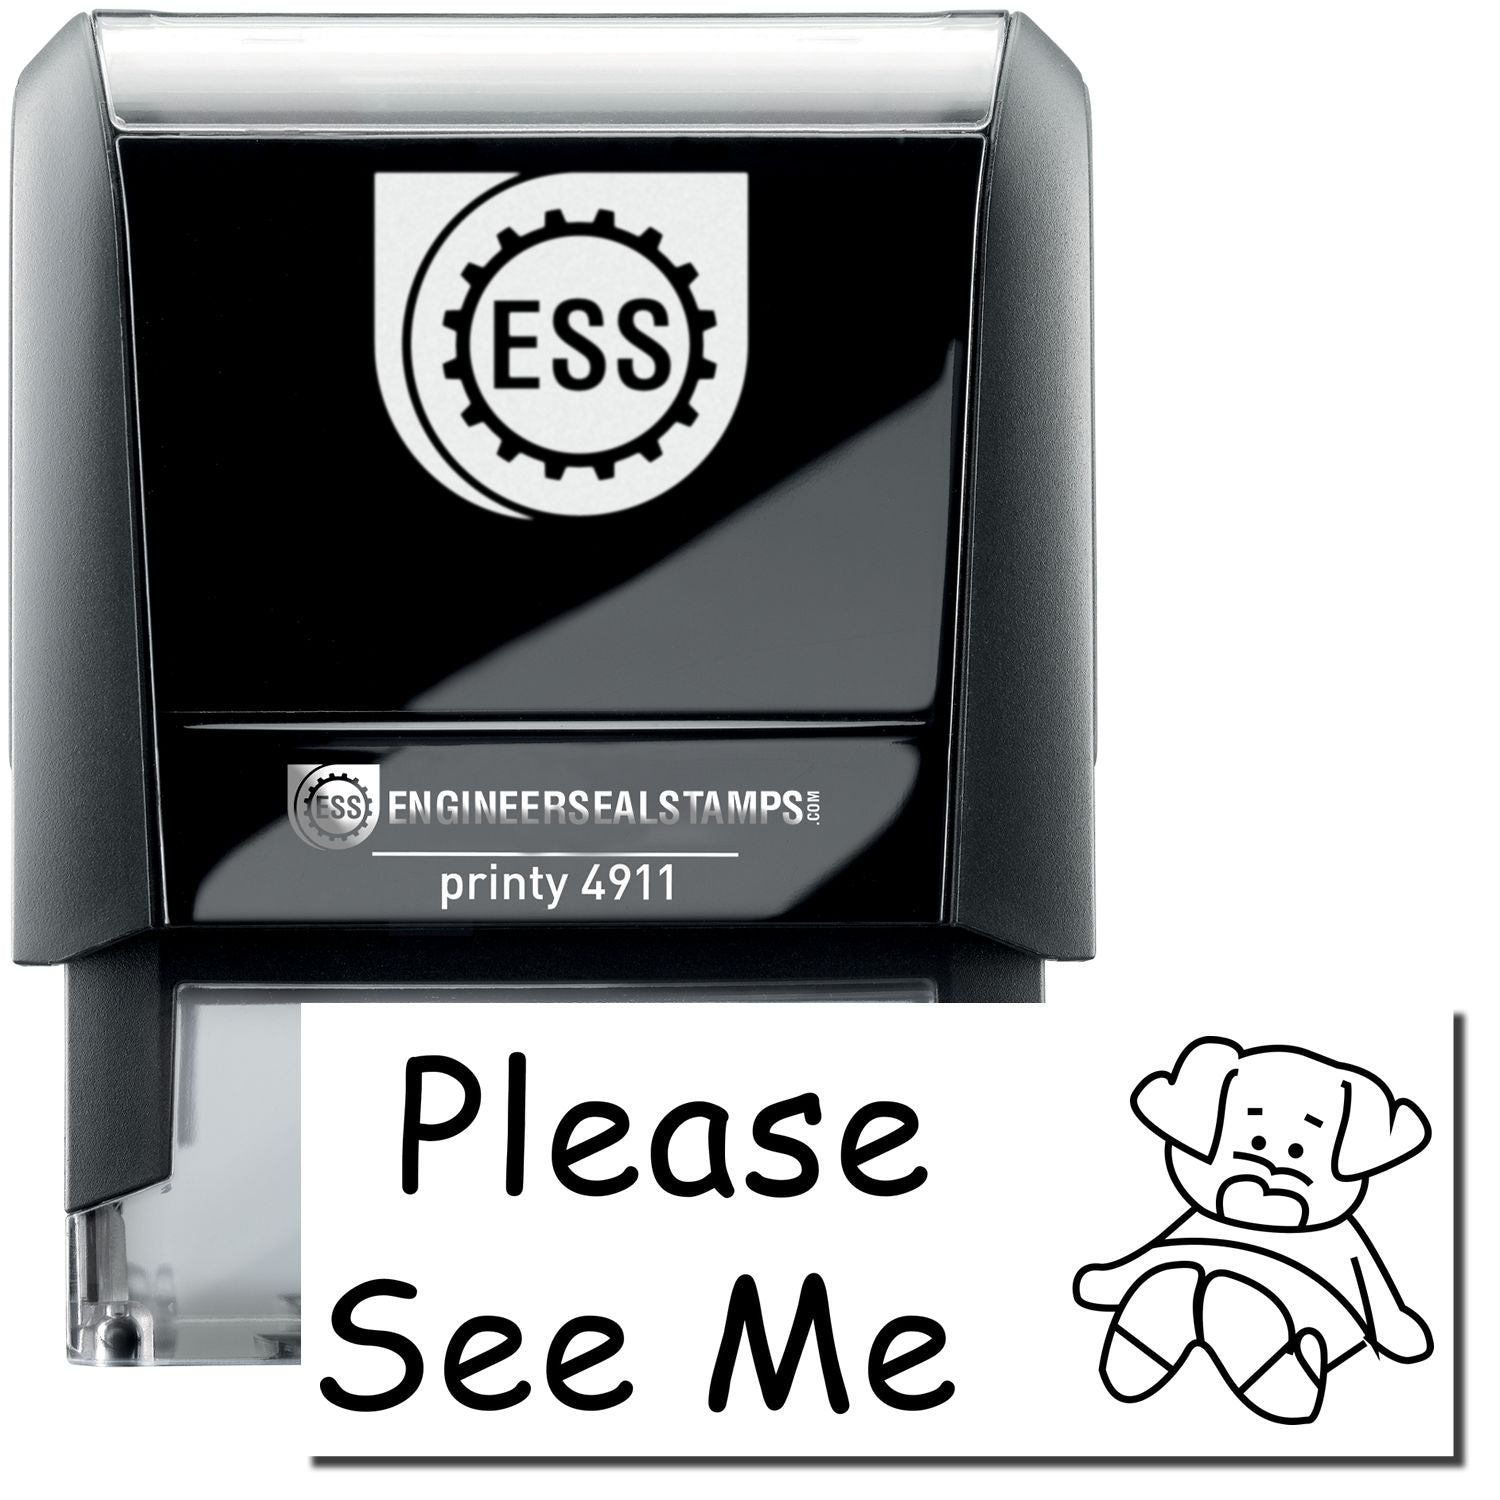 A self-inking stamp with a stamped image showing how the text "Please See Me" with a small image of a dog on the right side is displayed after stamping.